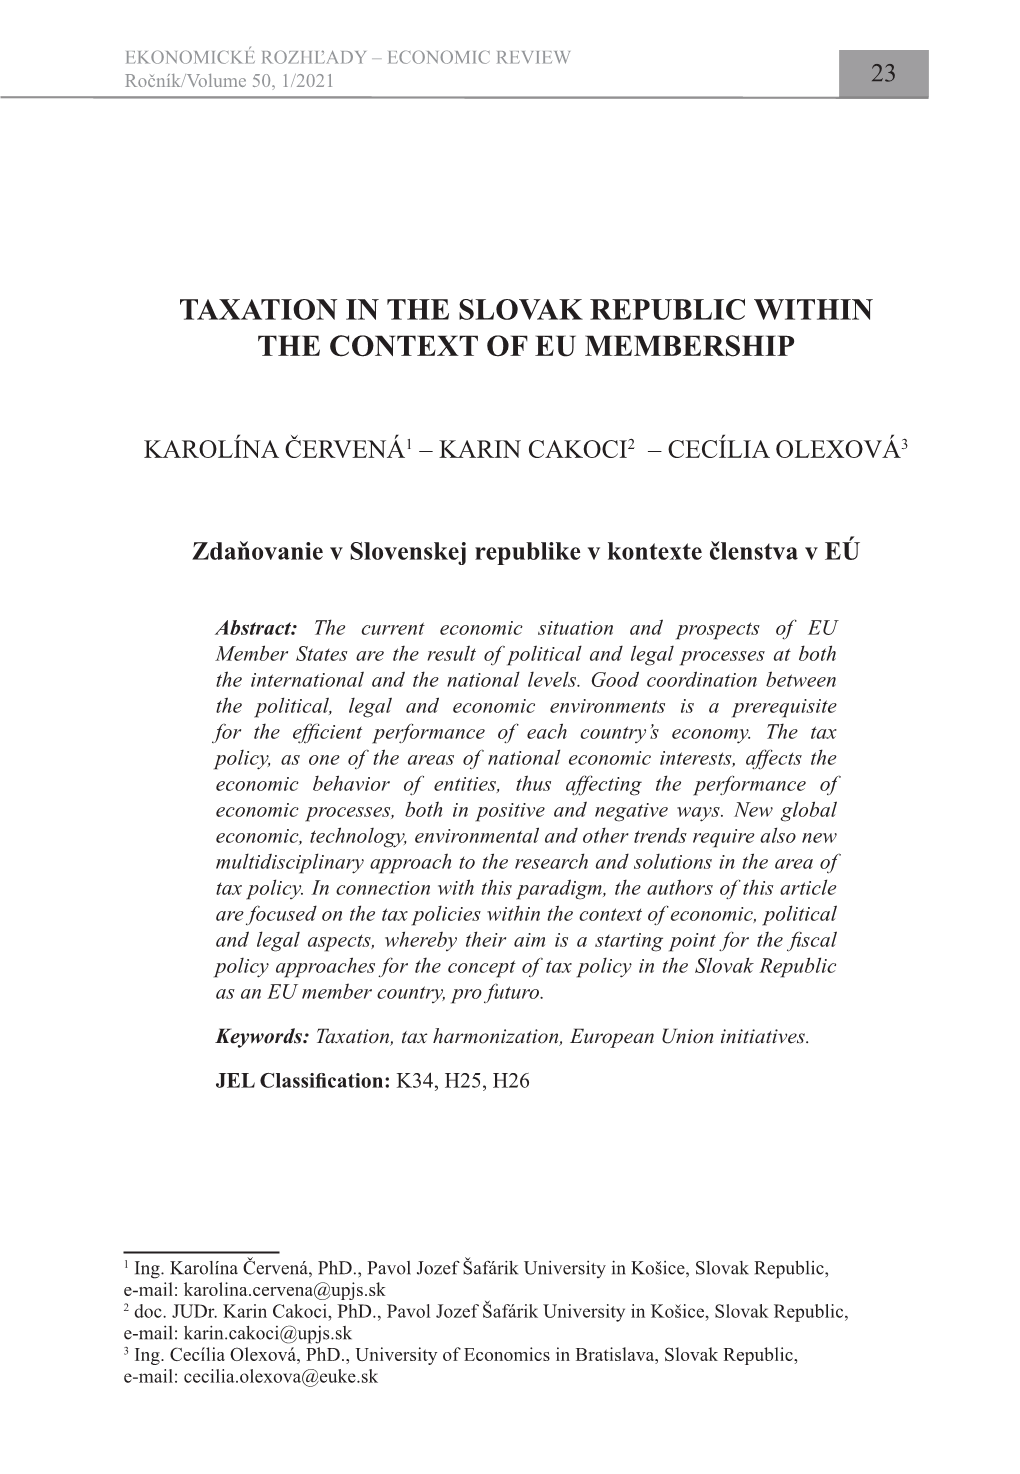 Taxation in the Slovak Republic Within the Context of Eu Membership